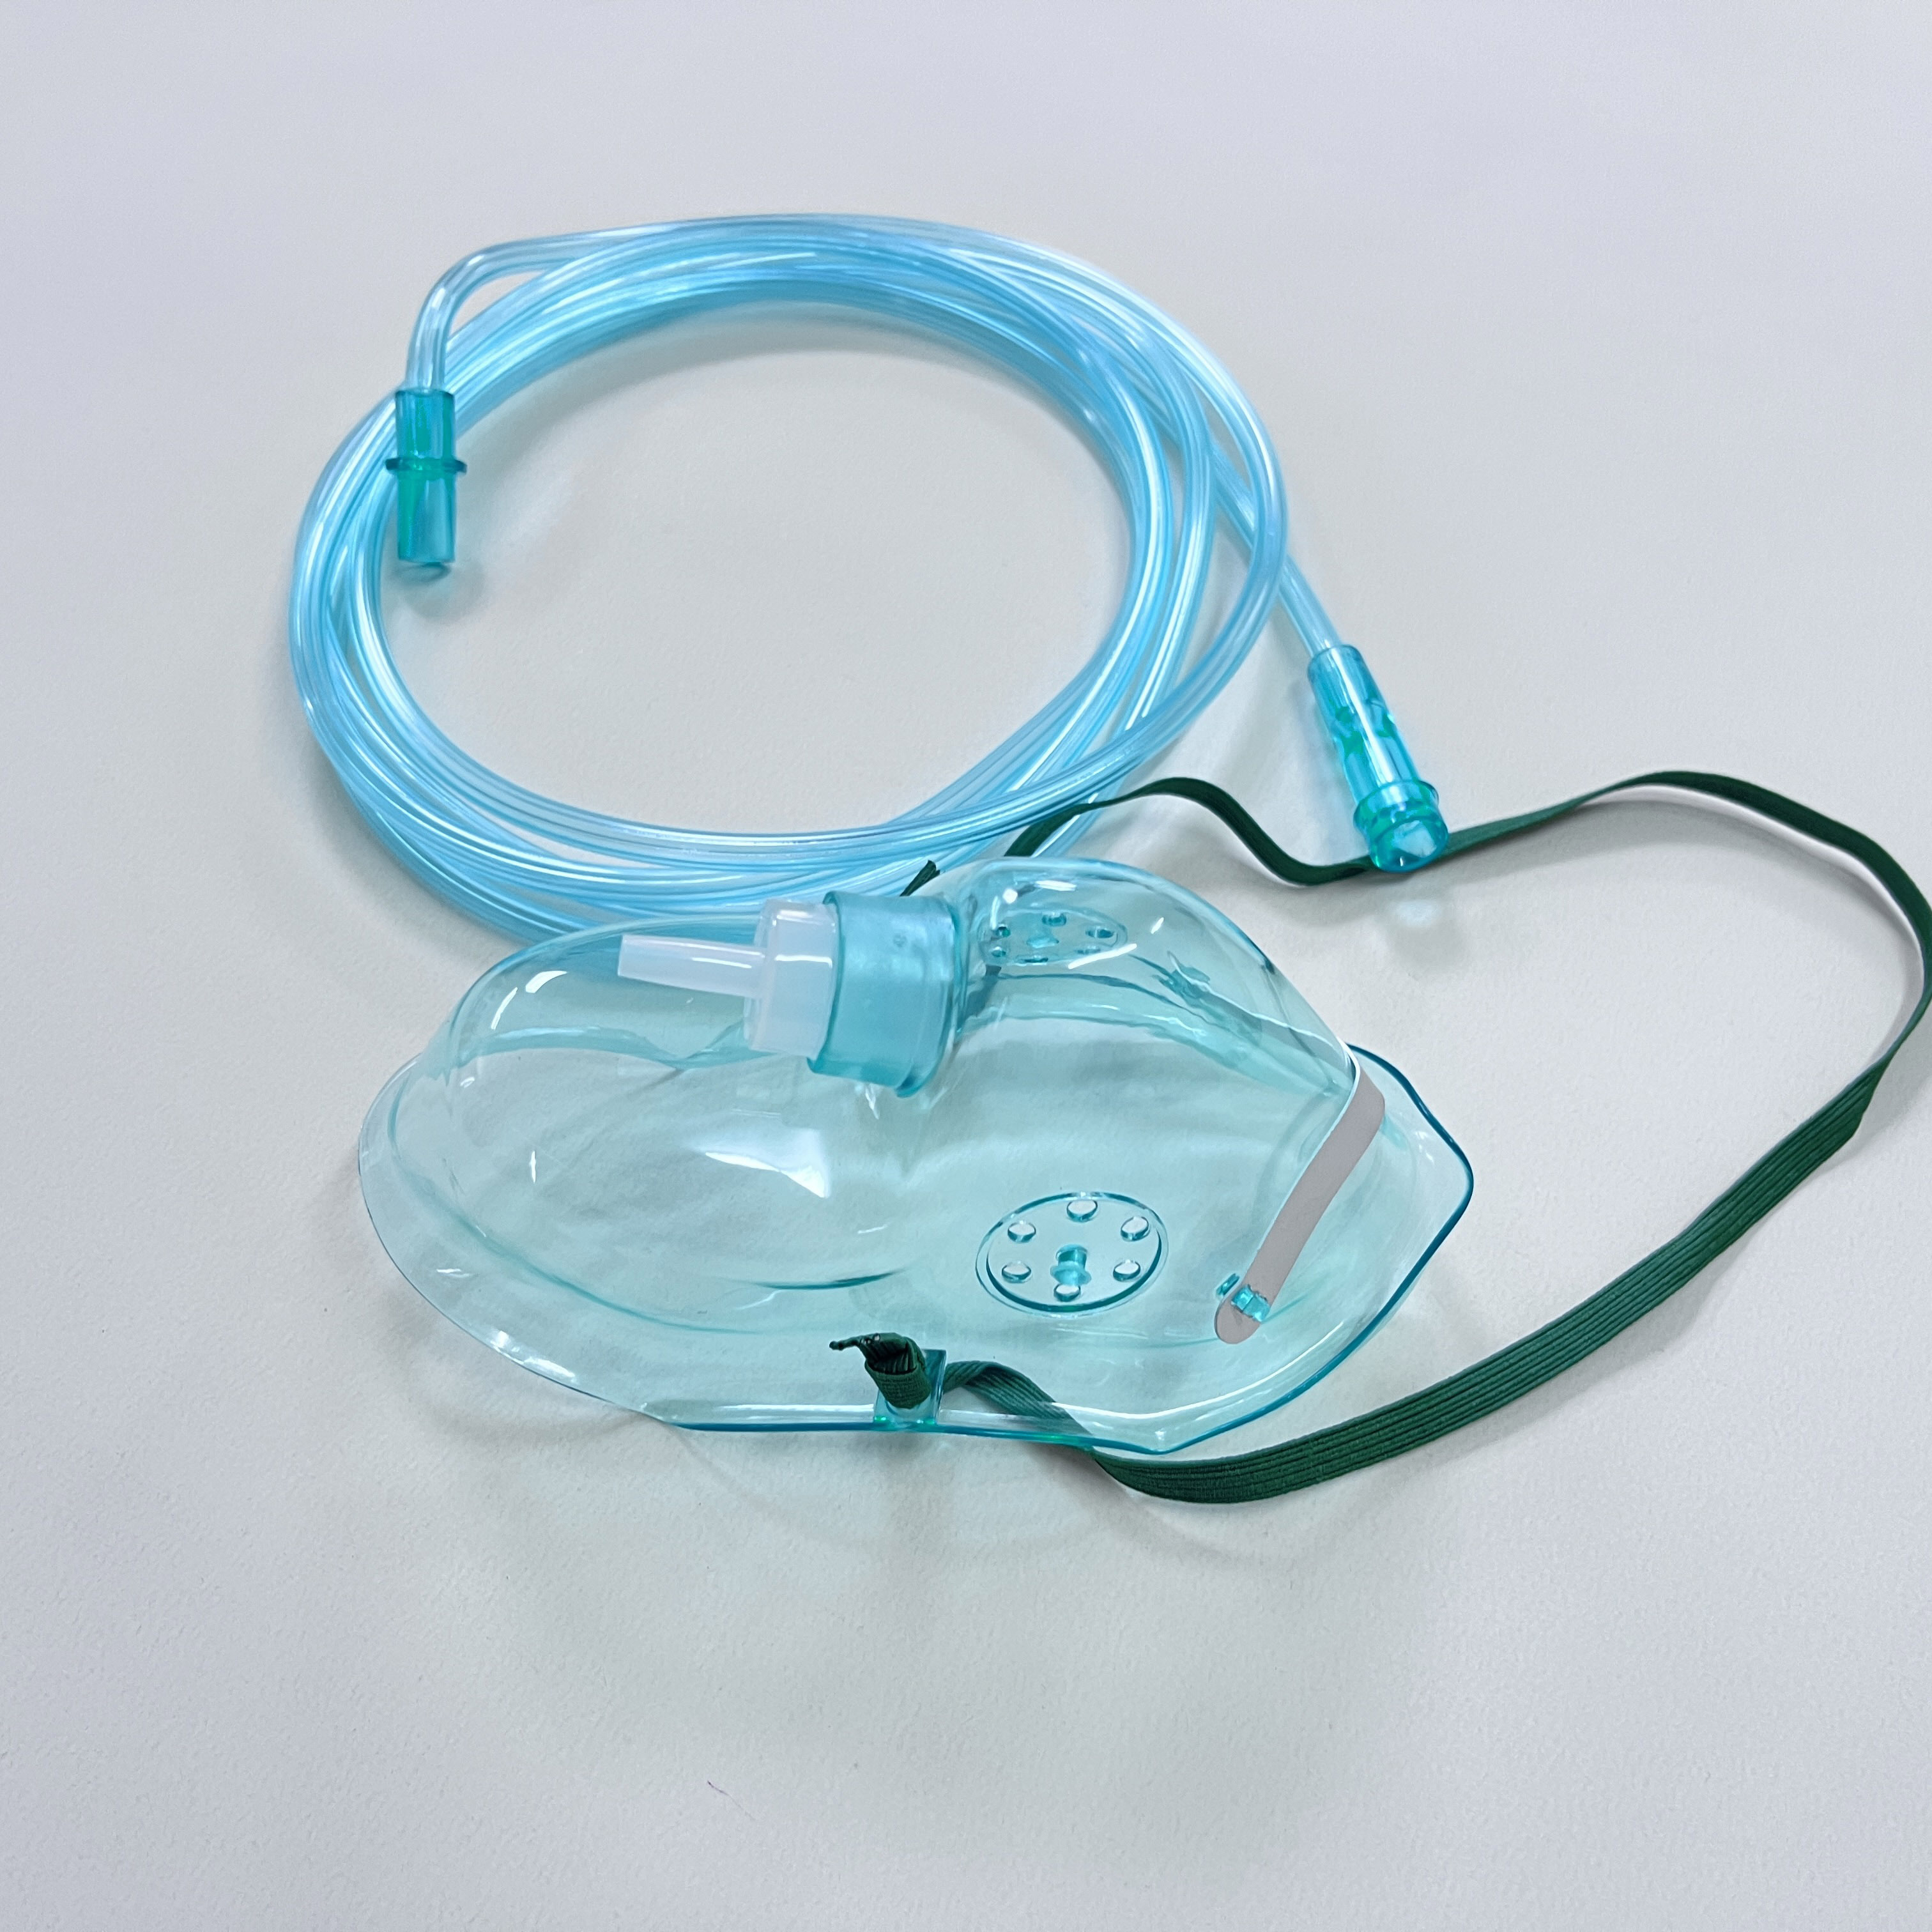 Oxygen mask for adult & pediatric